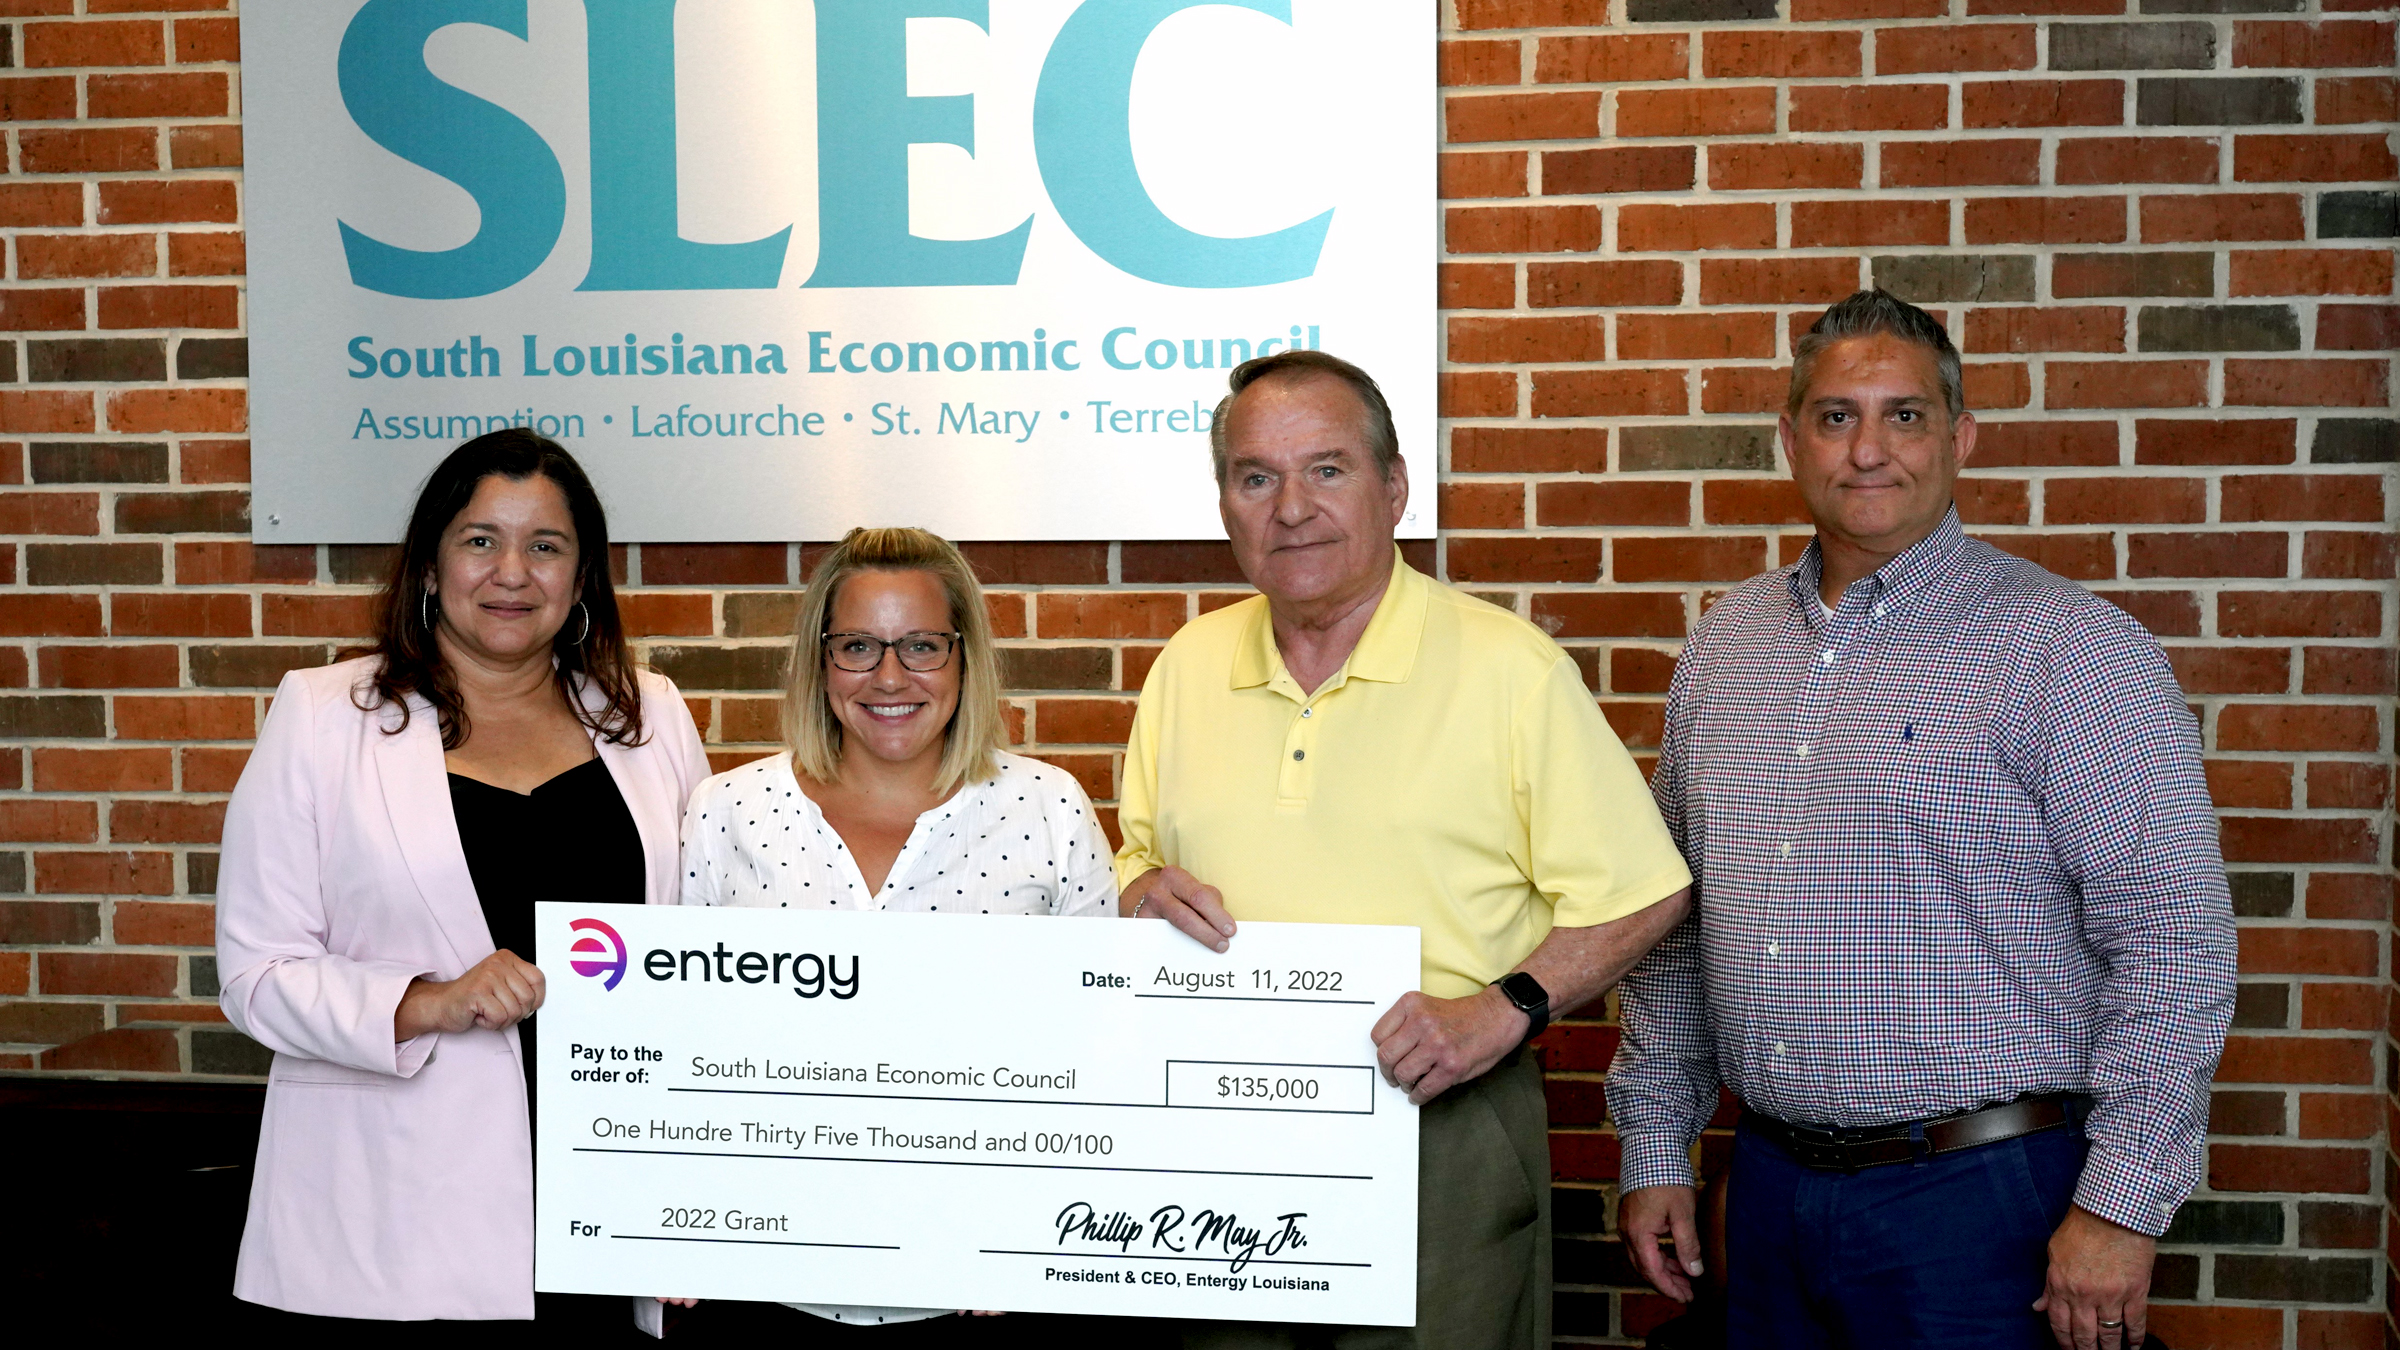 Pictured, from left, are Ana Gale Orellana, Entergy Louisiana business and economic development project manager; Deanna Lafont, consultant supporting SLEC; Vic Lafont, SLEC president and CEO; and Perry Pertuit, Entergy Louisiana new business development manager.